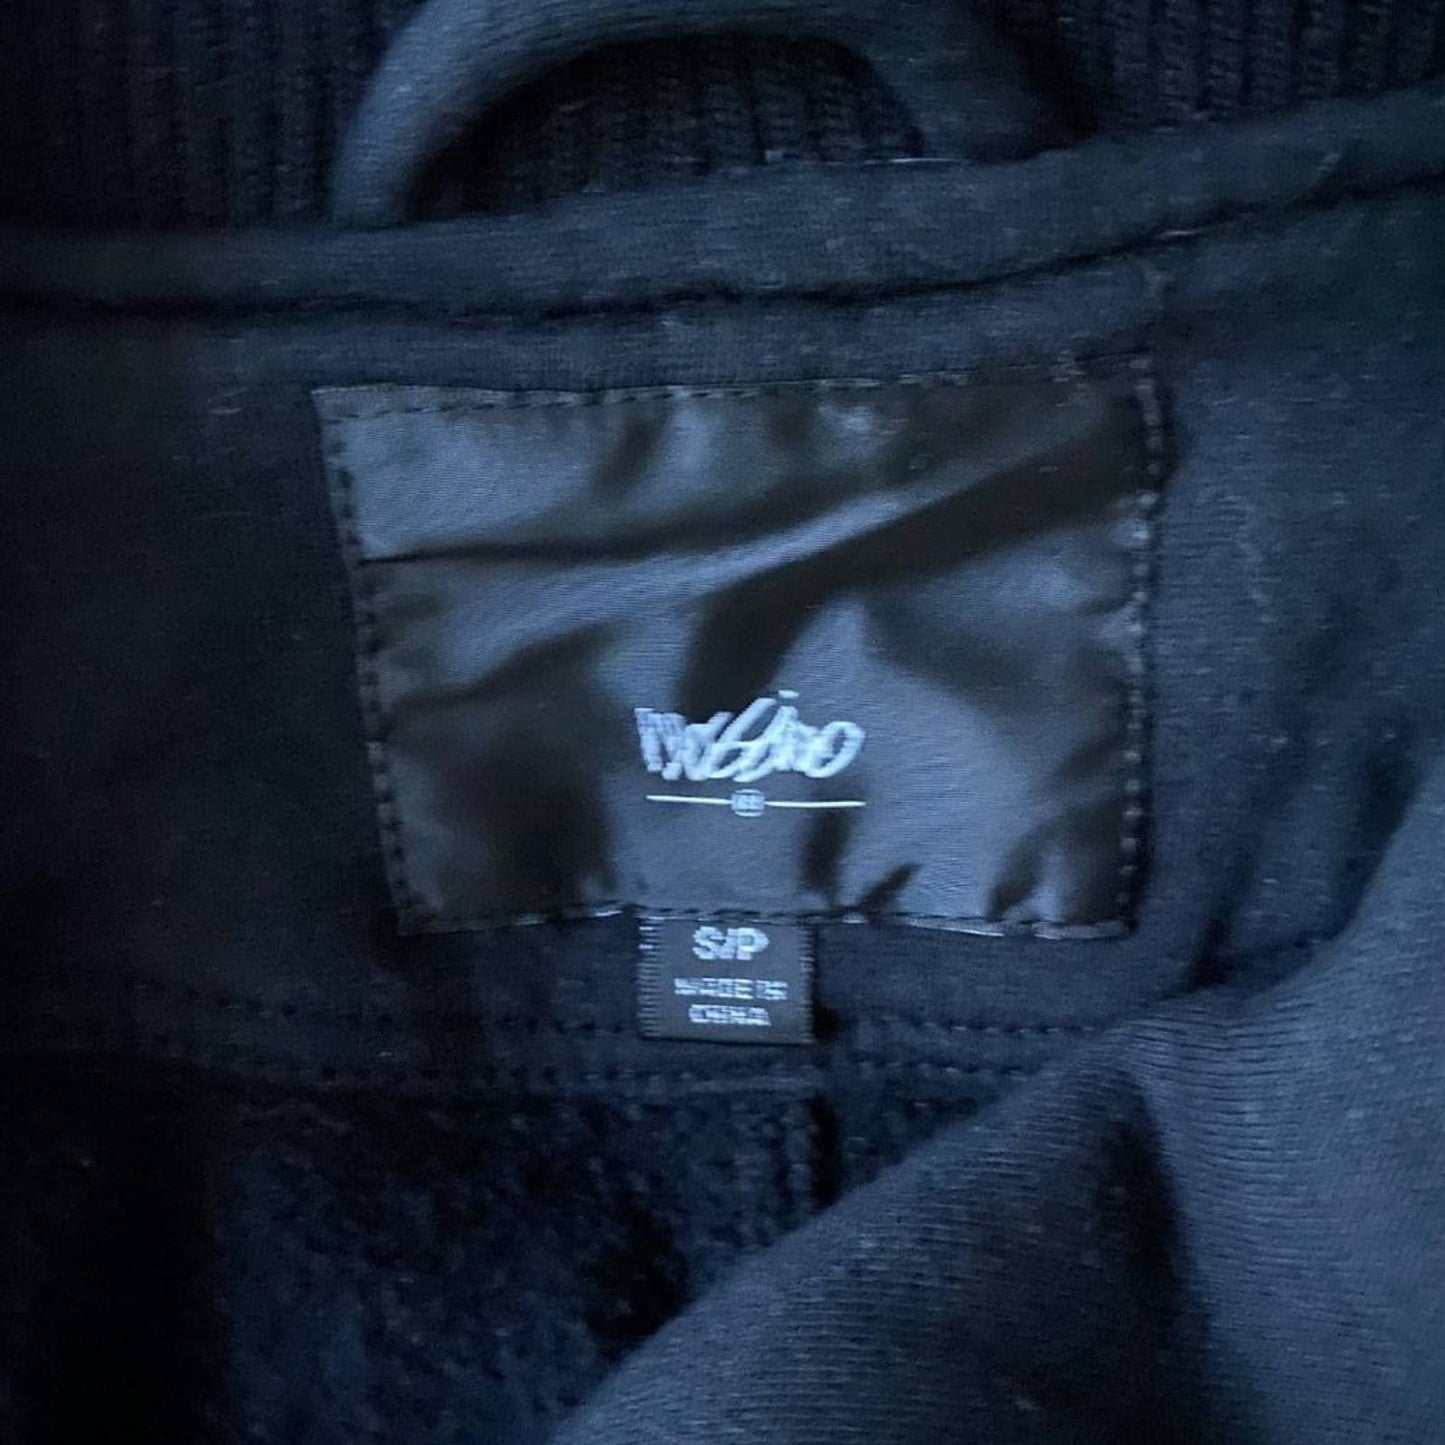 Mossimo sz S  double breasted winter coat